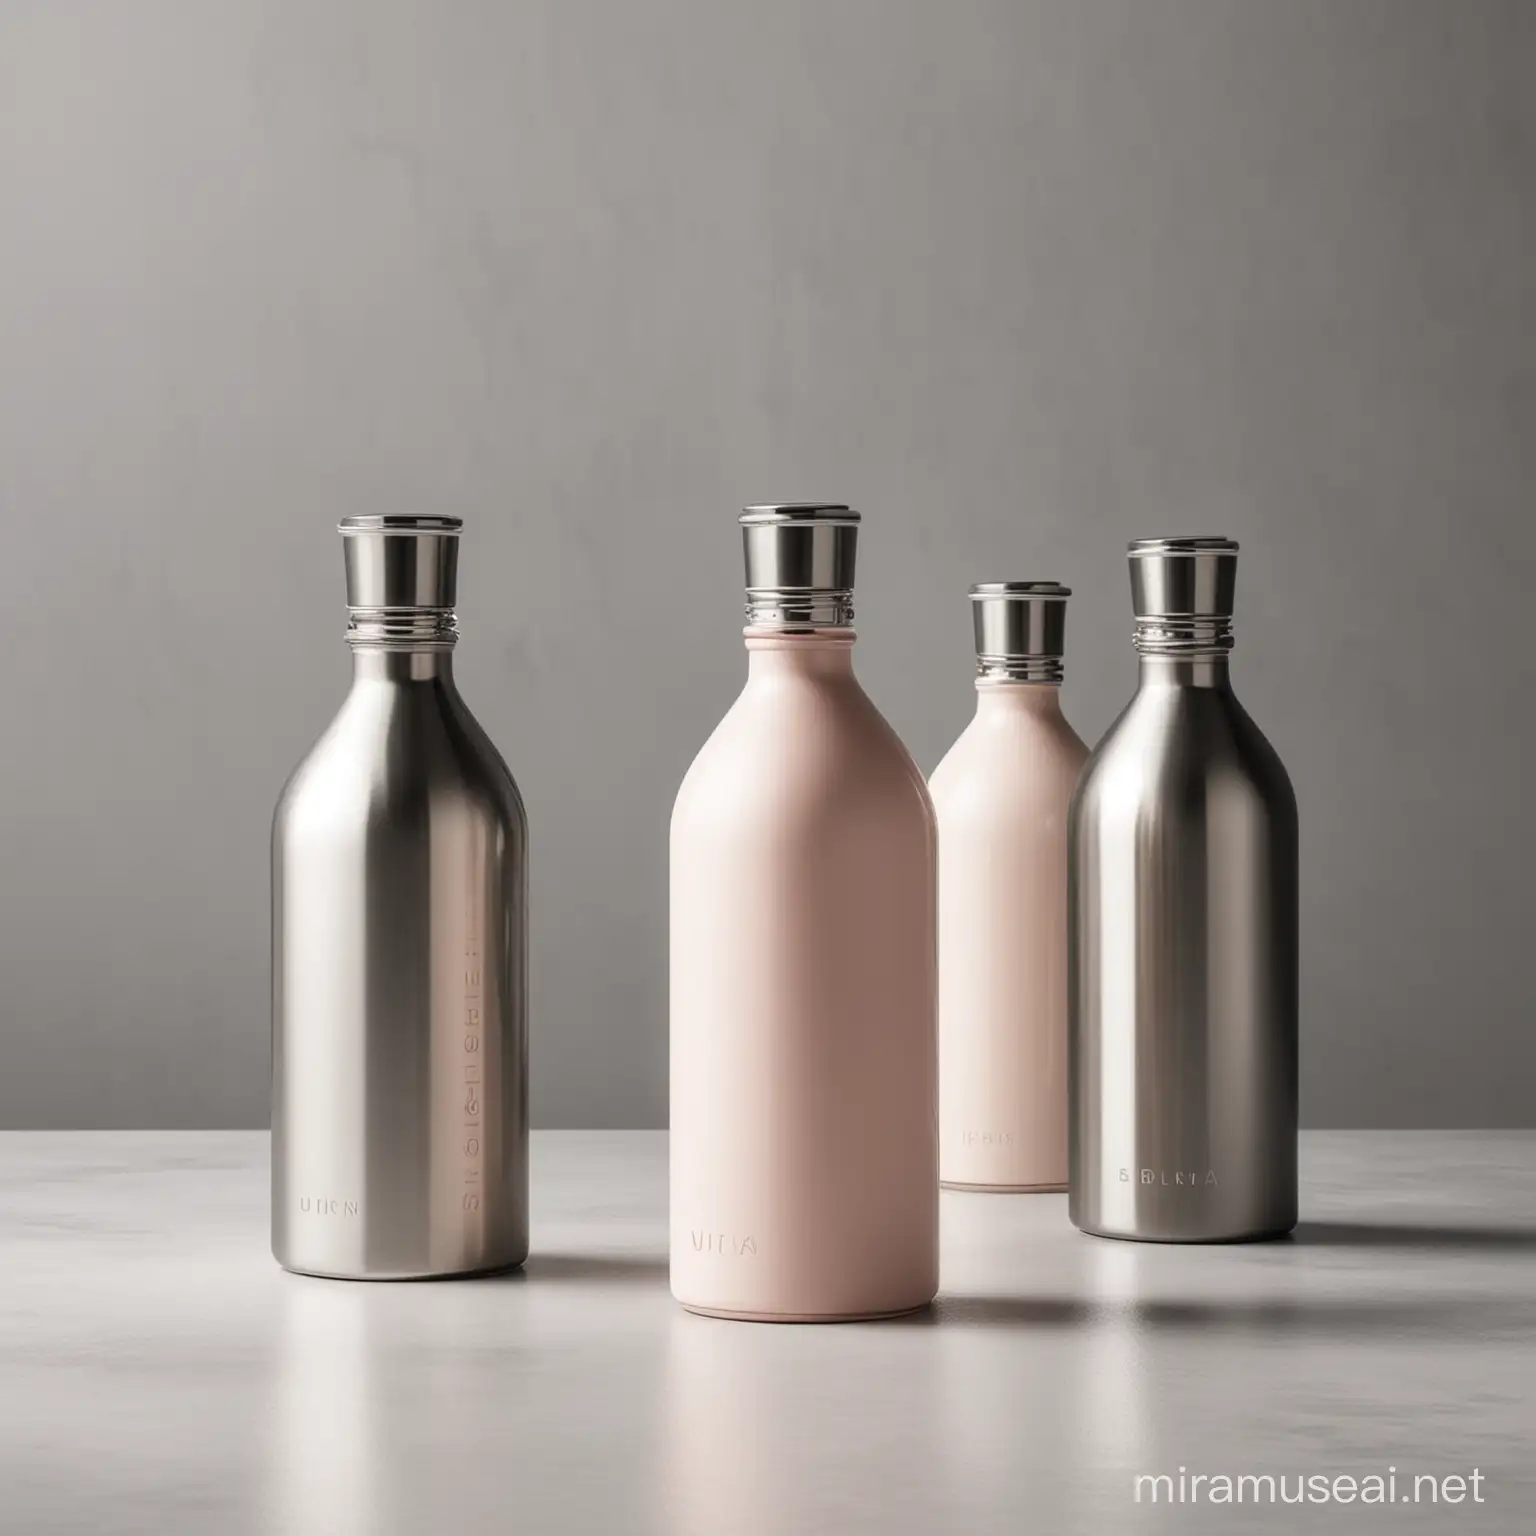 urban bottle design with feminine details and industrial accents to make the fragrance bottle modern and bold in a neutral setting with soft color palette, sleek accents of metal with touches of NYC